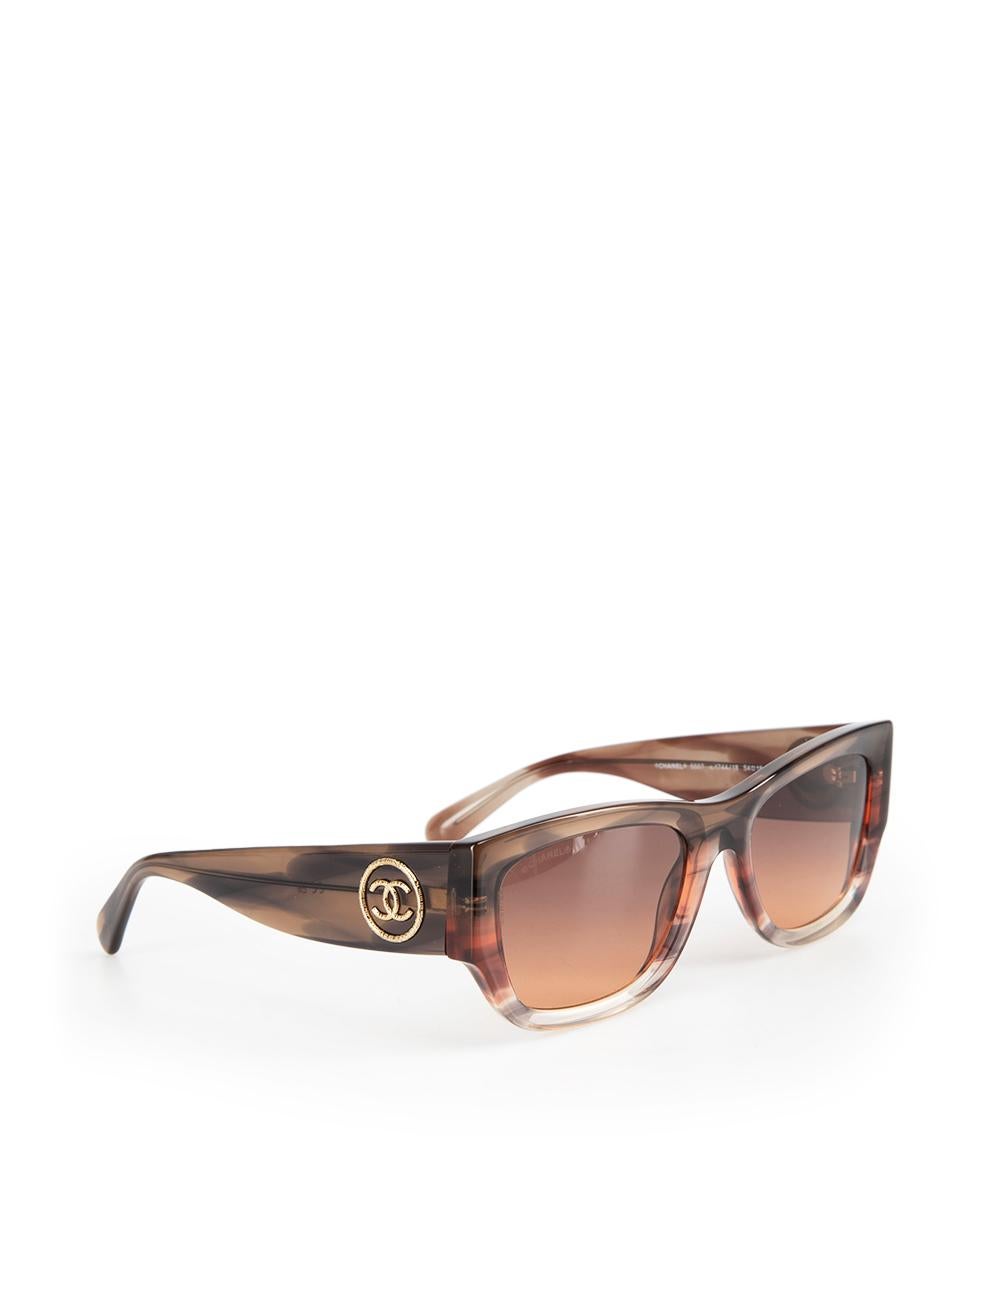 Chanel Brown & Orange Rectangle Sunglasses In New Condition For Sale In London, GB